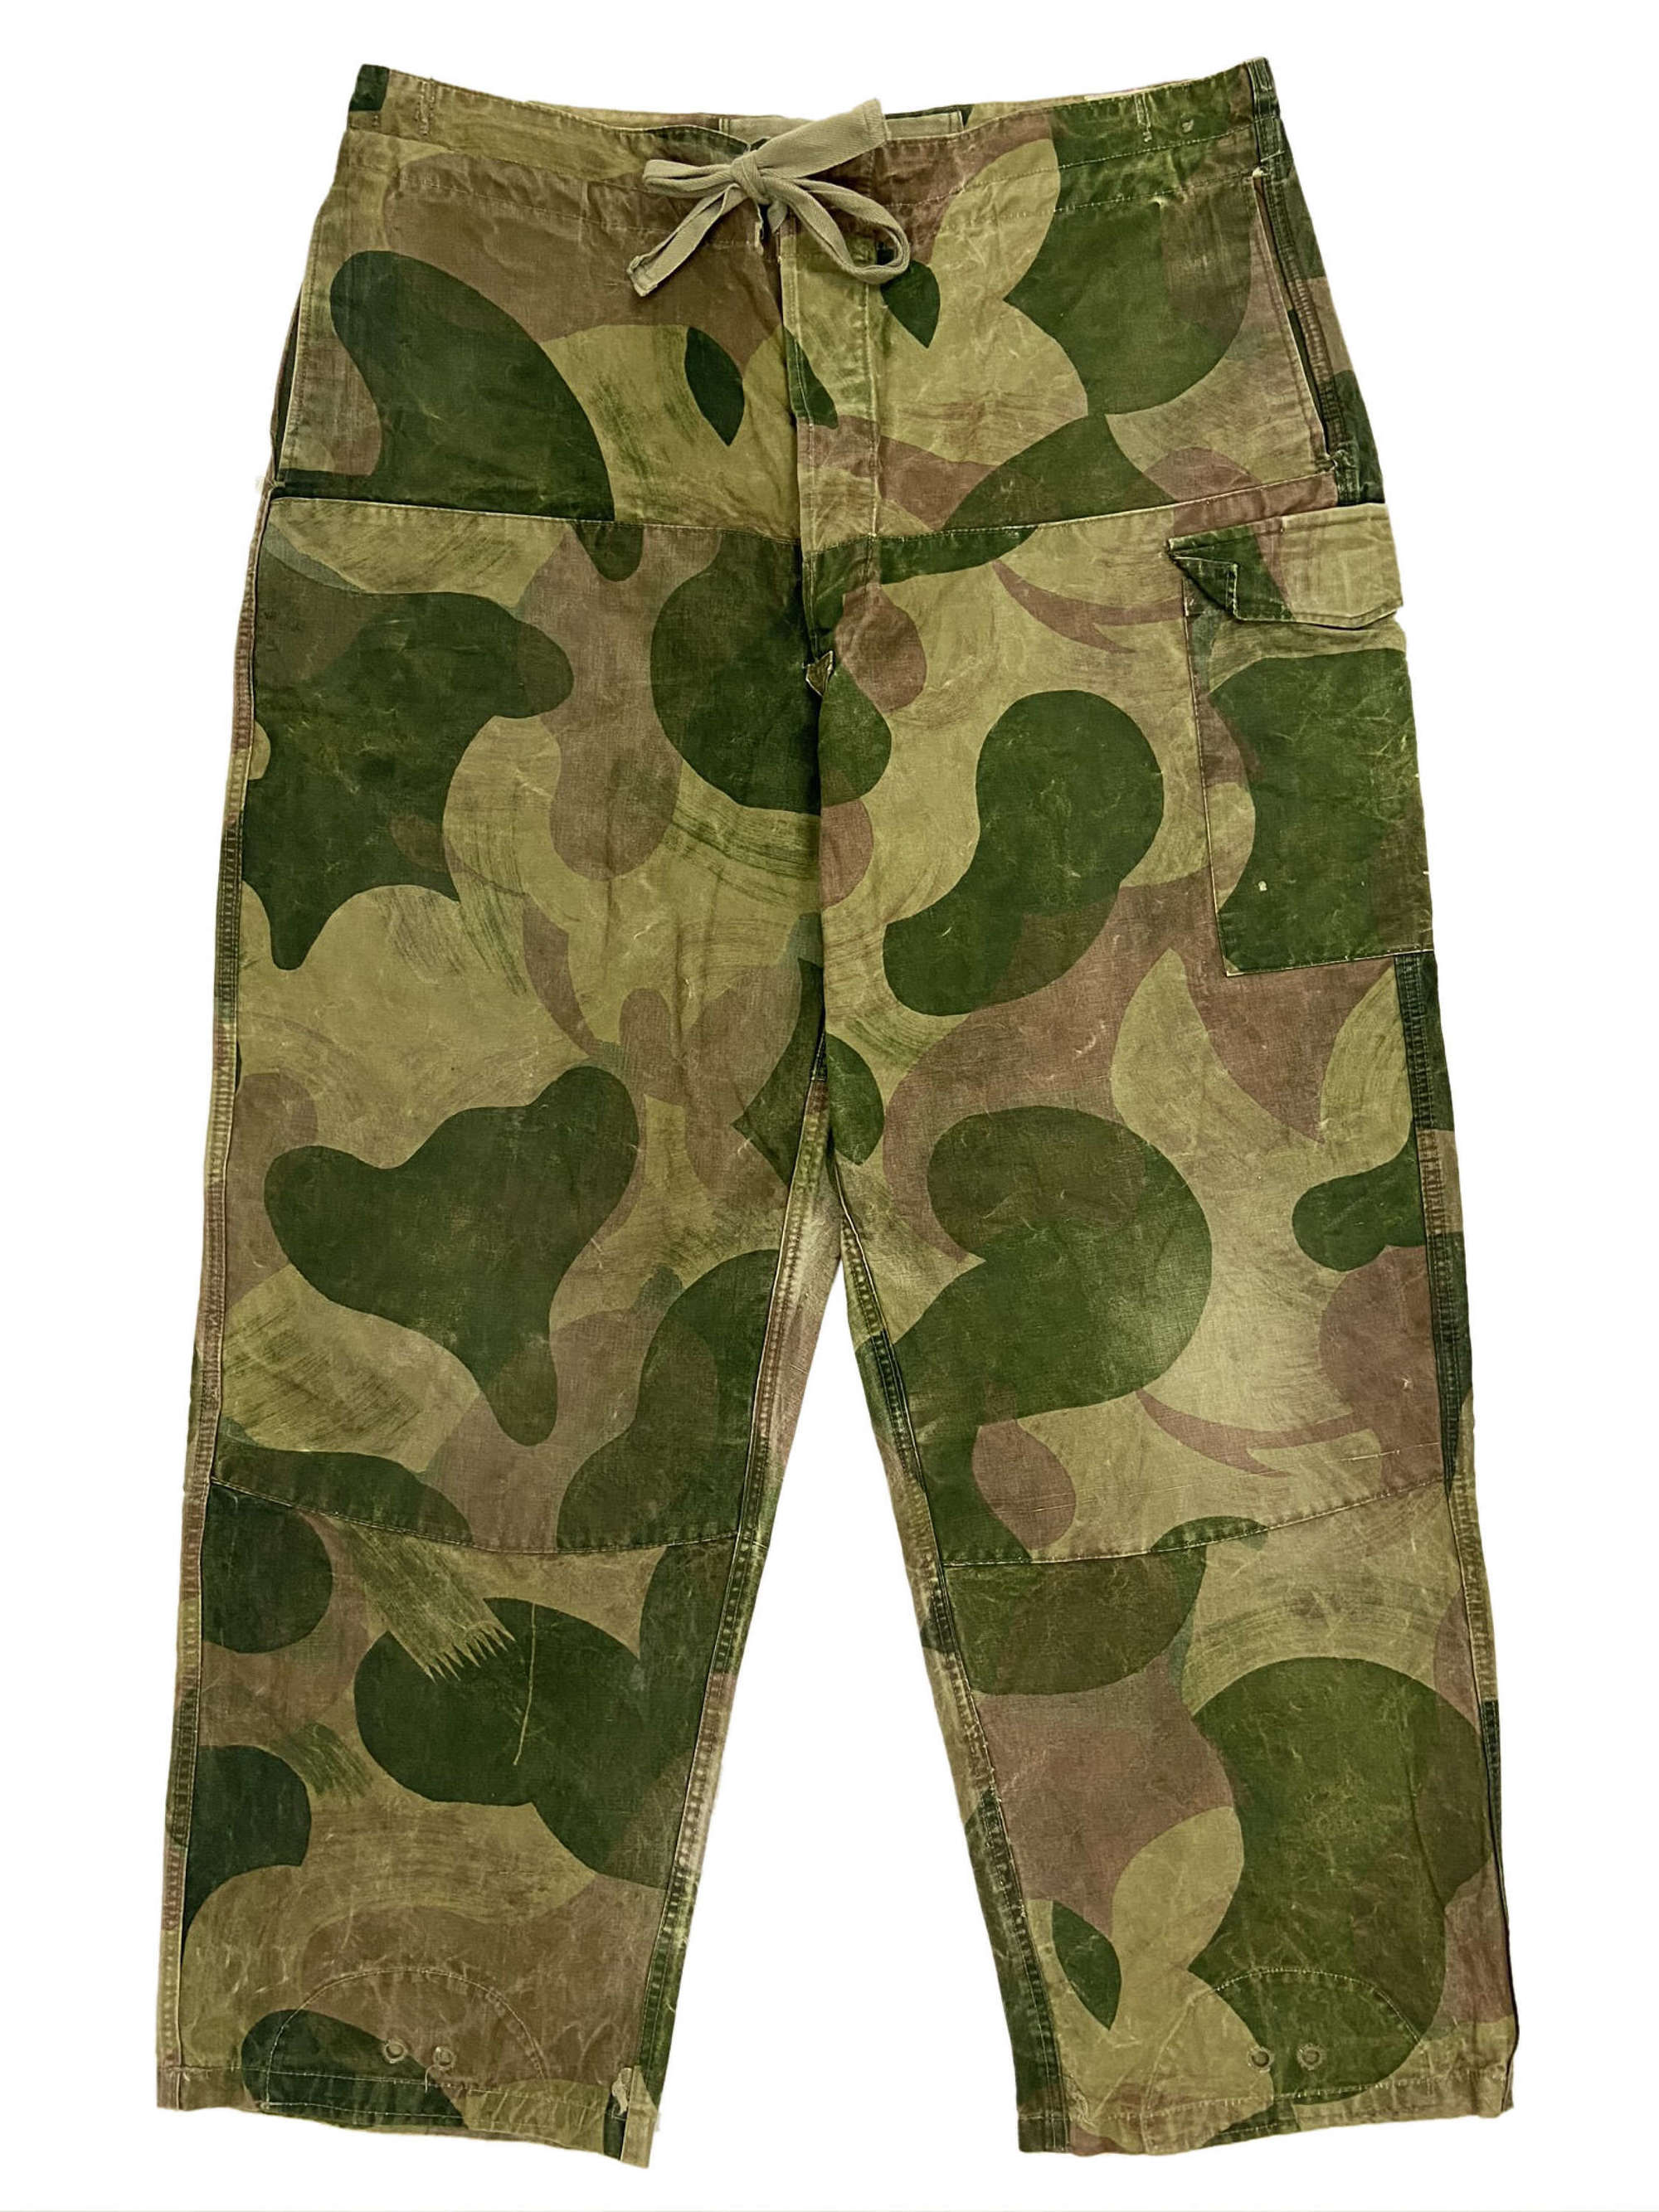 Original 1956 Dated Belgian Army Brushstroke Camouflage Trousers